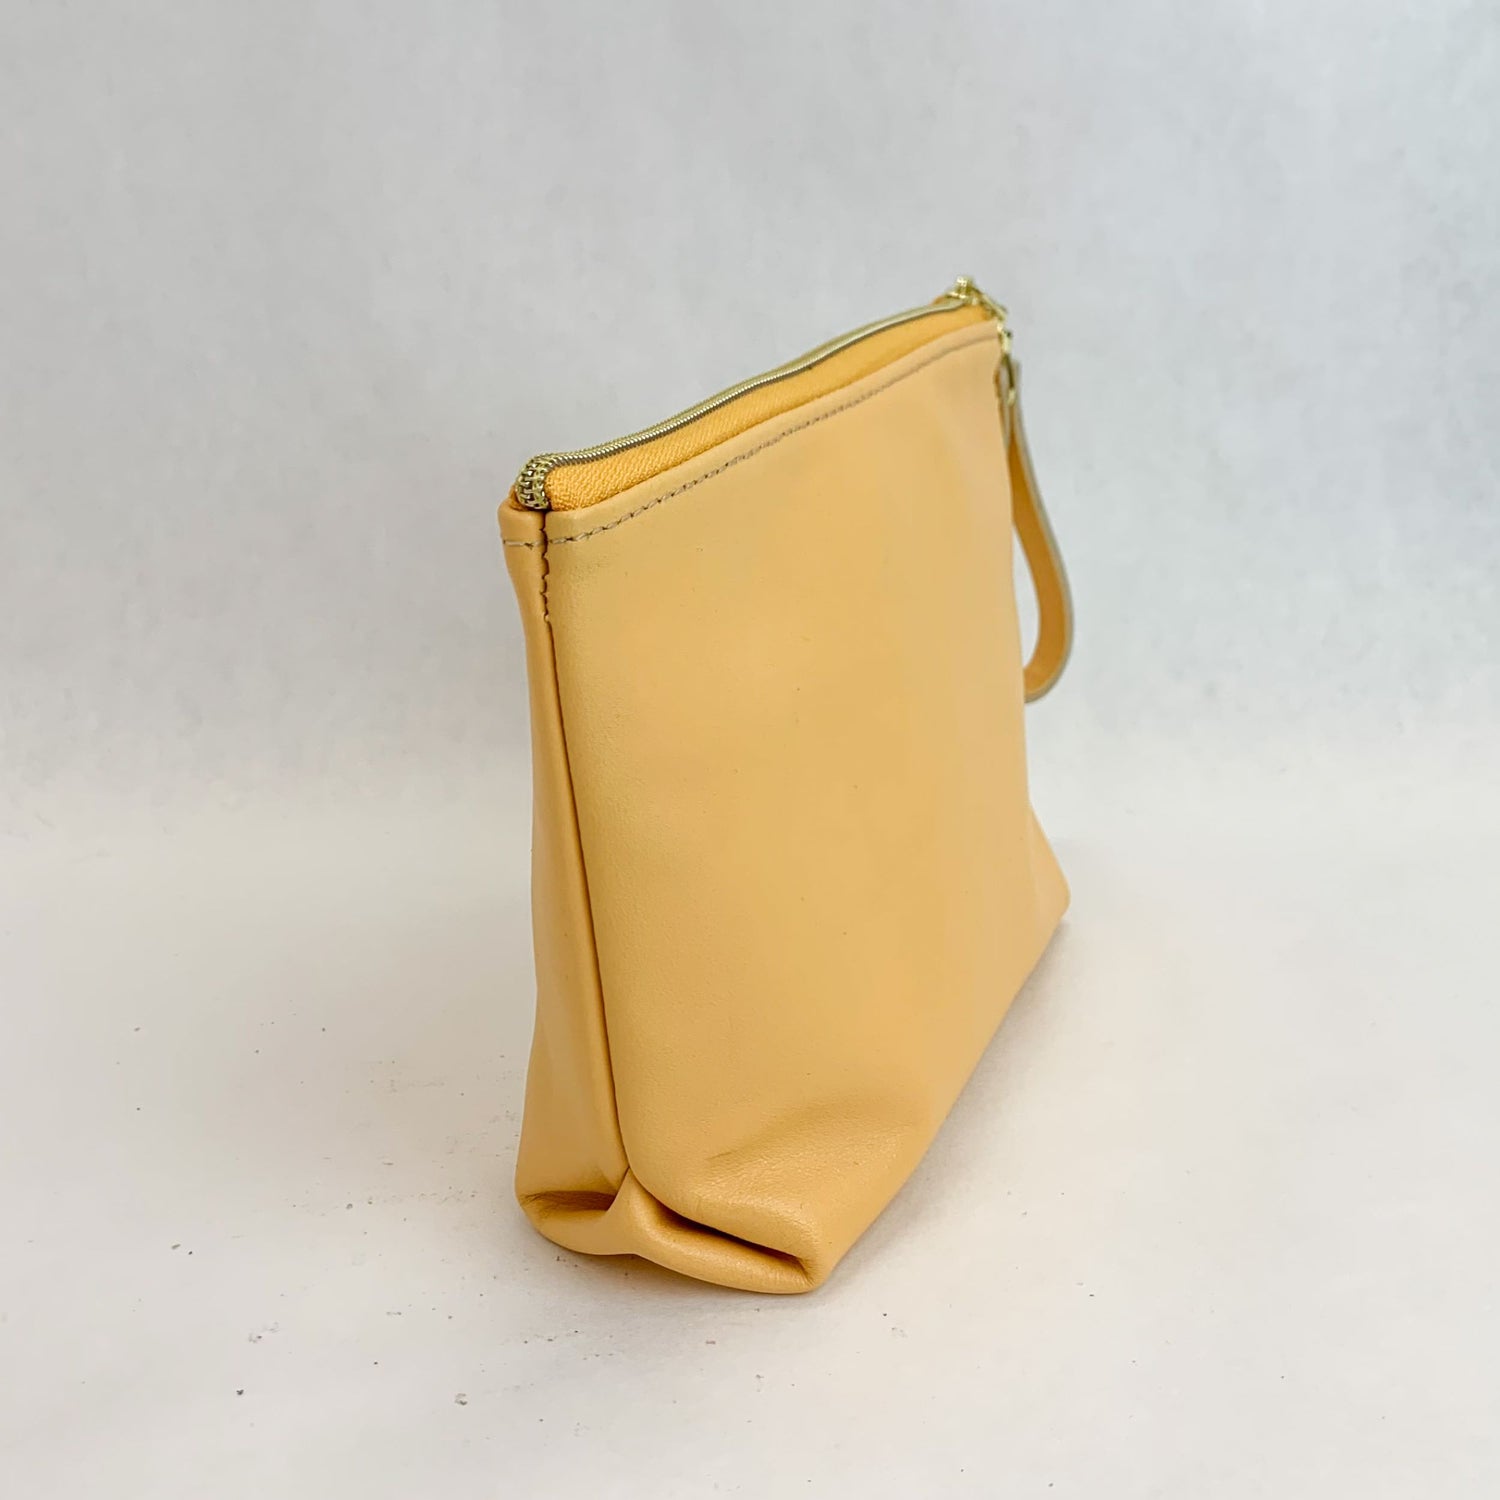 Side view T5 Cosmetics case toiletry bag designer handcrafted in smooth calf leather in saffron yellow.